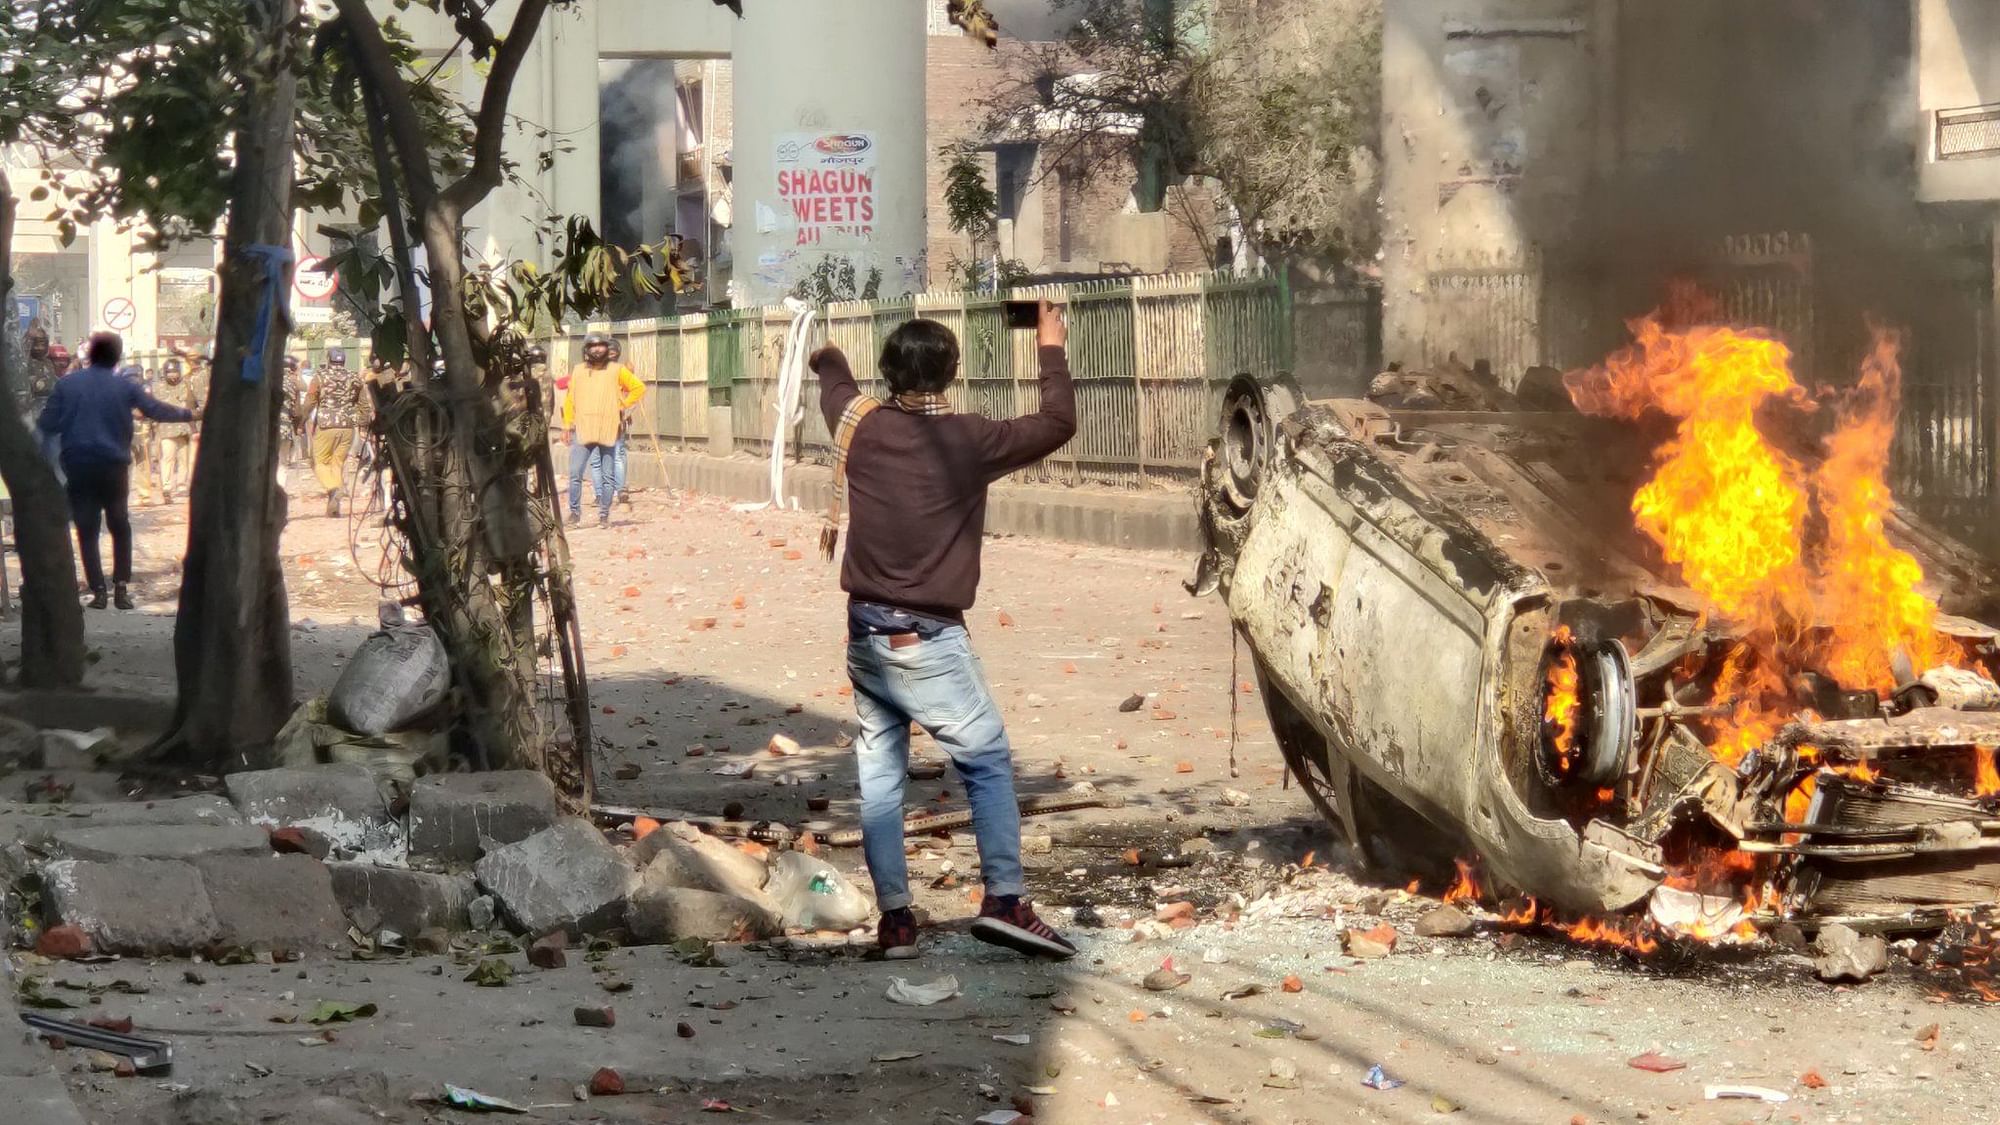 Maujpur-Jaffrabad was among the worst hit areas by the violence in Delhi